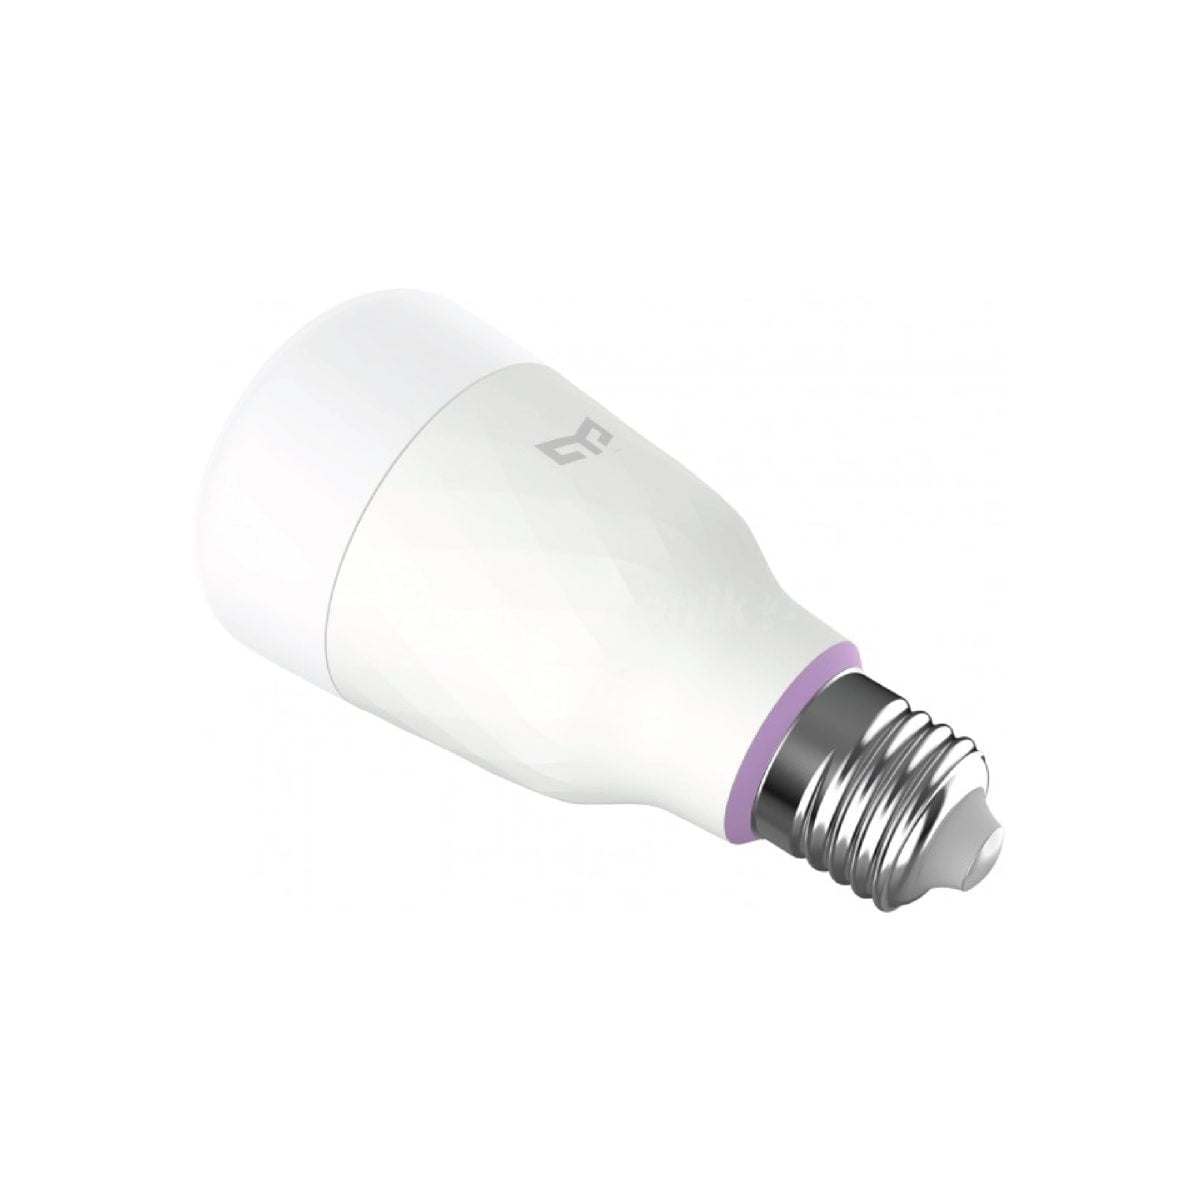 Bulb 25 Xiaomi The Yeelight 1S Rgb Smart Light Bulb Will Allow You To Create Your Own Smart Home. You Can Control It With Your Voice Or Application And Decide With What Temperature And Power It Should Shine. Luminous Flux: 800Lm Color Temperature: 1700K-6500K Lamp Holder: E27 Rated Power: 8.5W &Nbsp; 16 Million Colors Wifi Enabled, Voice Control, App Control, Music Sync &Lt;Img Class=&Quot;Alignnone Wp-Image-8061 Size-Full&Quot; Src=&Quot;Https://Lablaab.com/Wp-Content/Uploads/2020/04/Bulb-27-2-Scaled.jpg&Quot; Alt=&Quot;&Quot; Width=&Quot;2560&Quot; Height=&Quot;357&Quot; /&Gt; &Nbsp; Yeelight Smart Bulb 1S (Color)